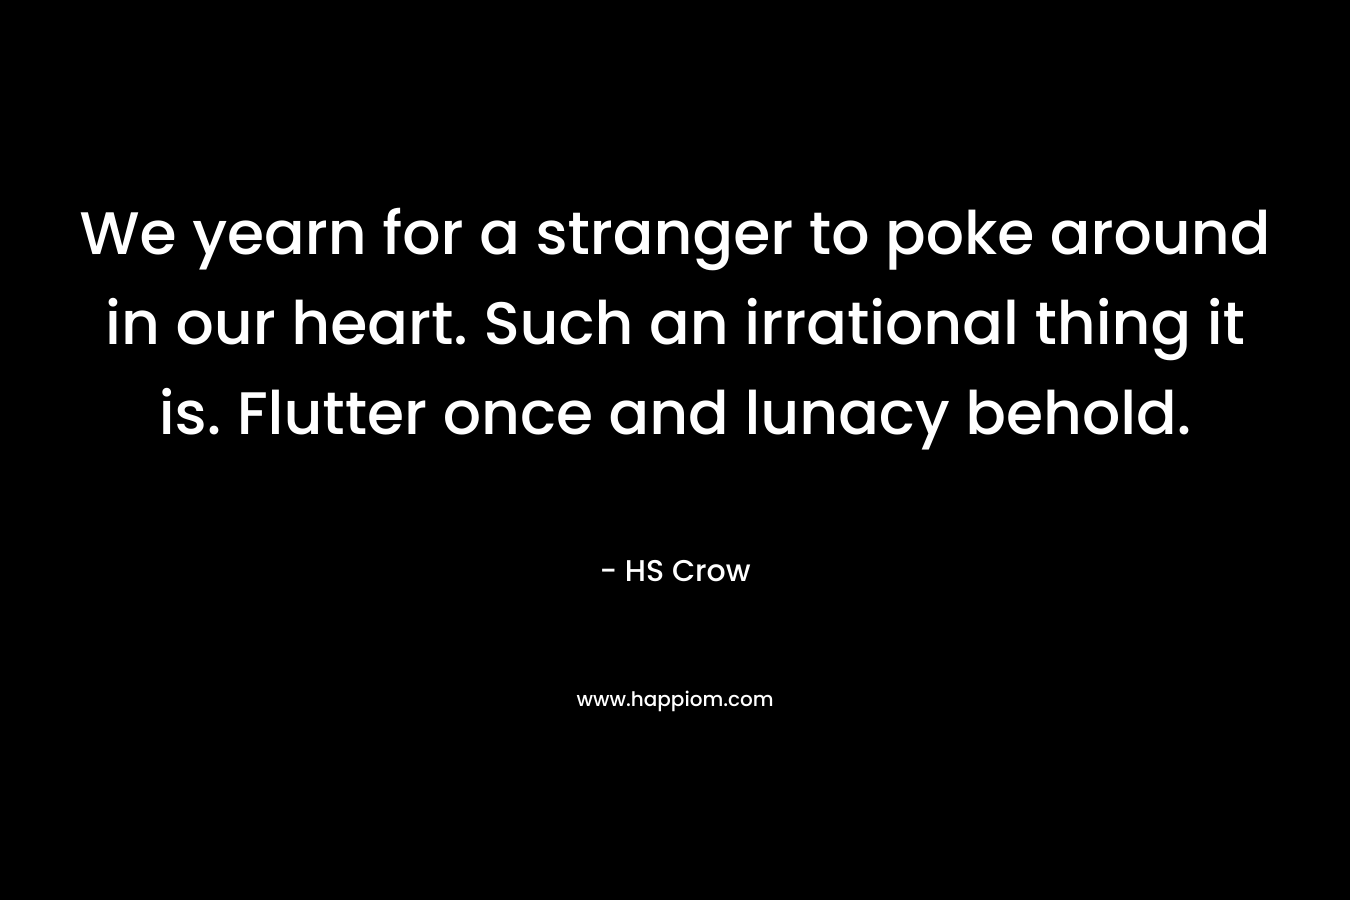 We yearn for a stranger to poke around in our heart. Such an irrational thing it is. Flutter once and lunacy behold.